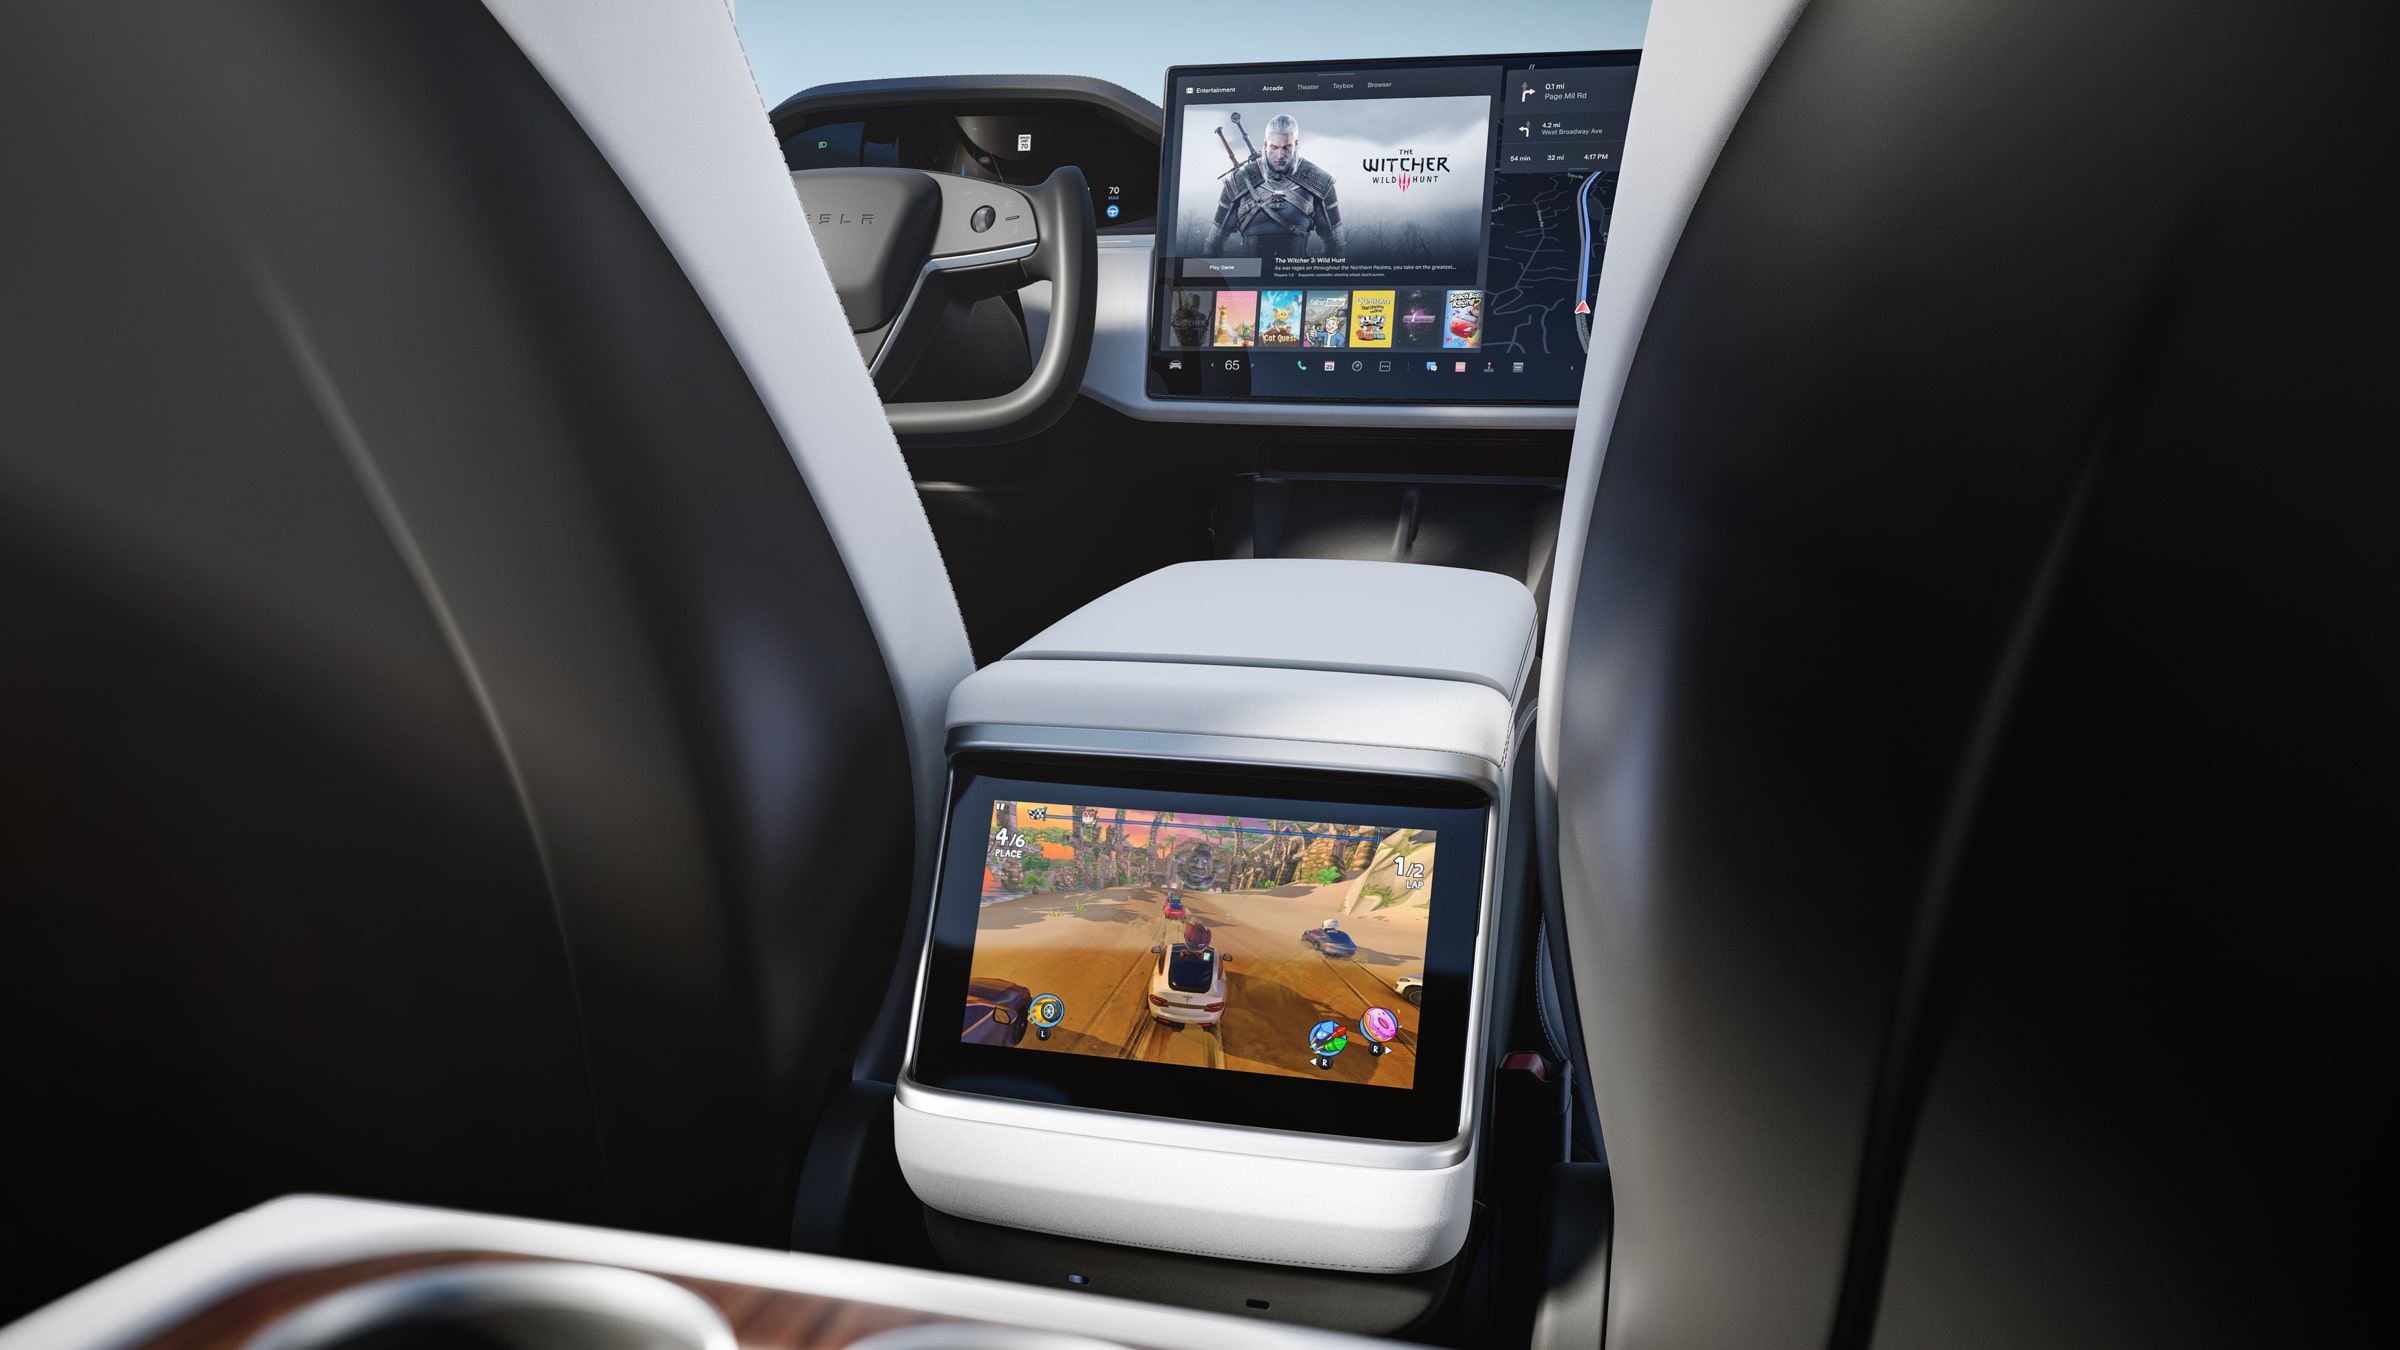 Tesla Model S Plaid center console and rear passenger screen with Netflix and console games